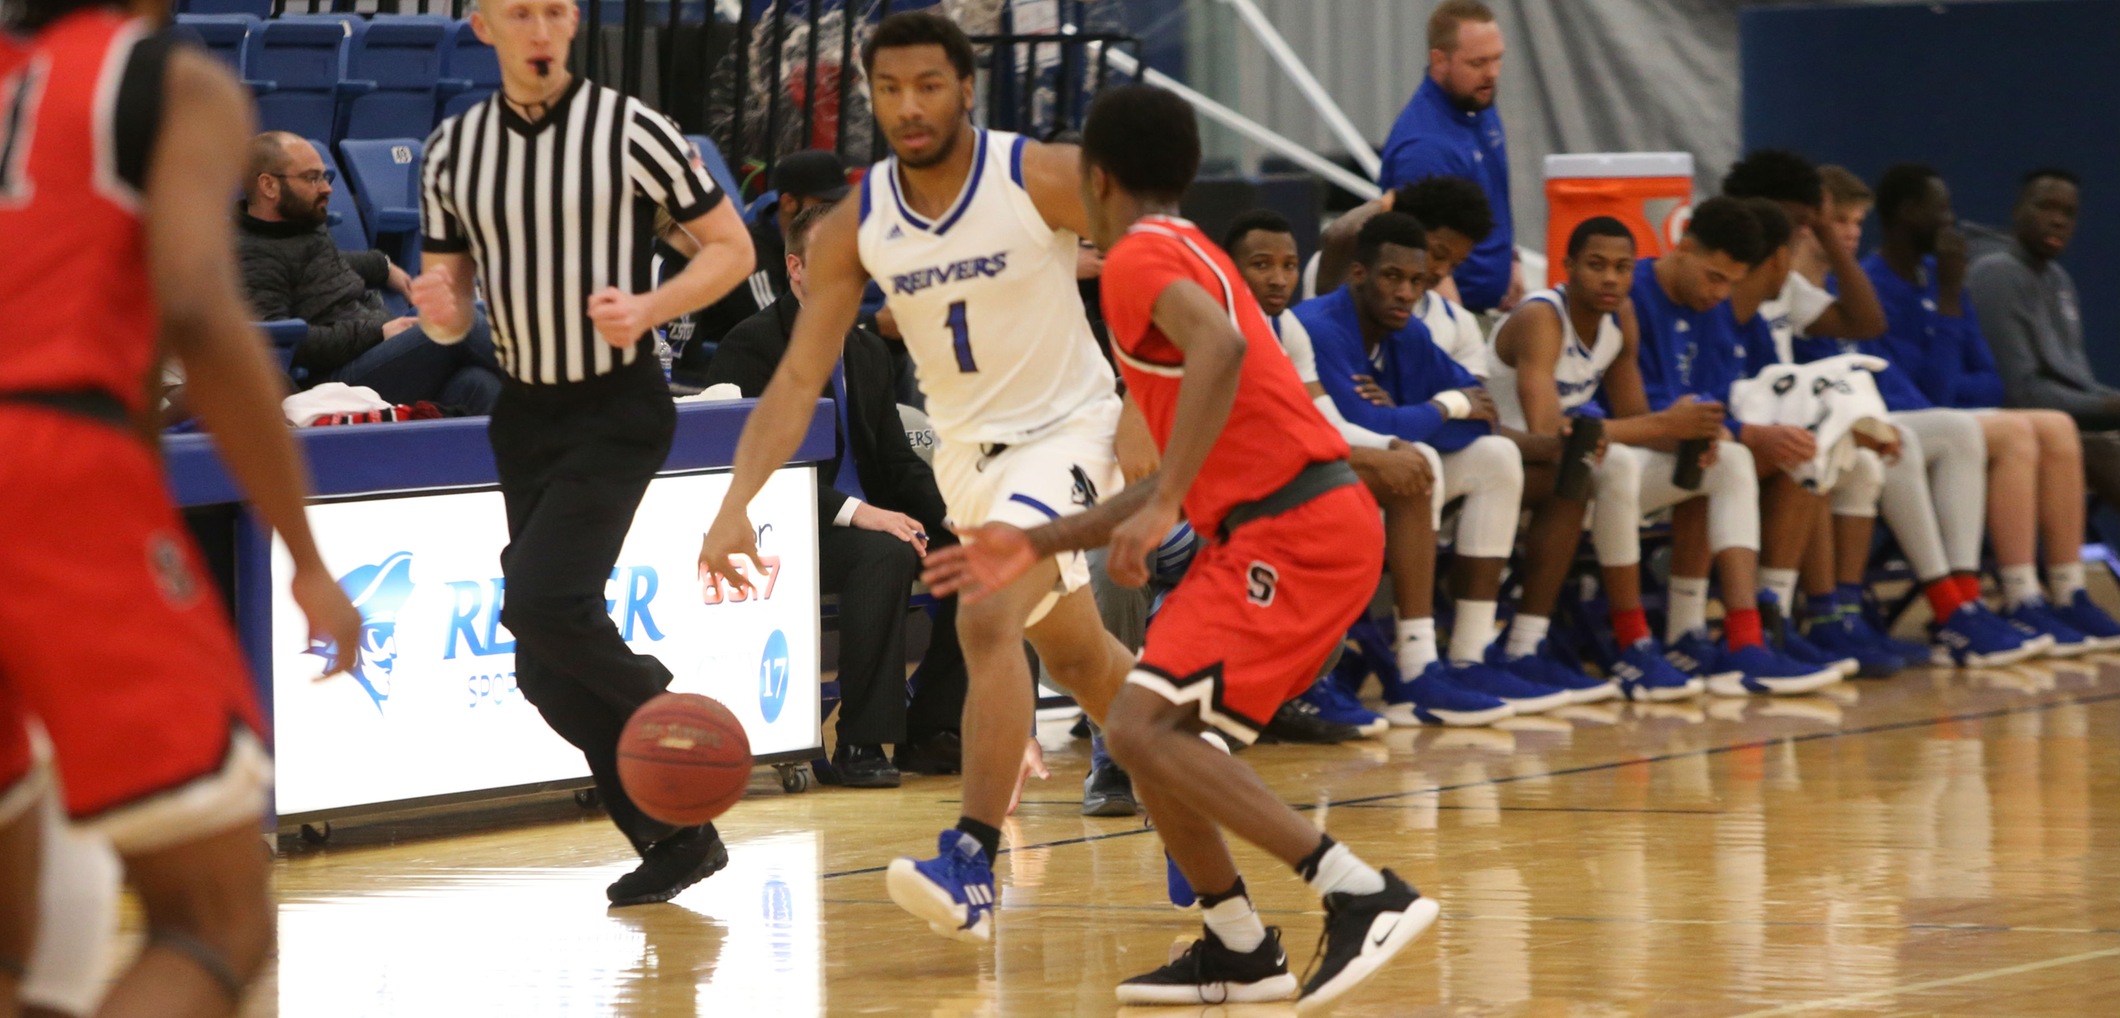 Willard Anderson and his Iowa Western teammates lost to the visiting Blackhawks of Southeastern Wednesday evening (1/30/19) at Reiver Arena.